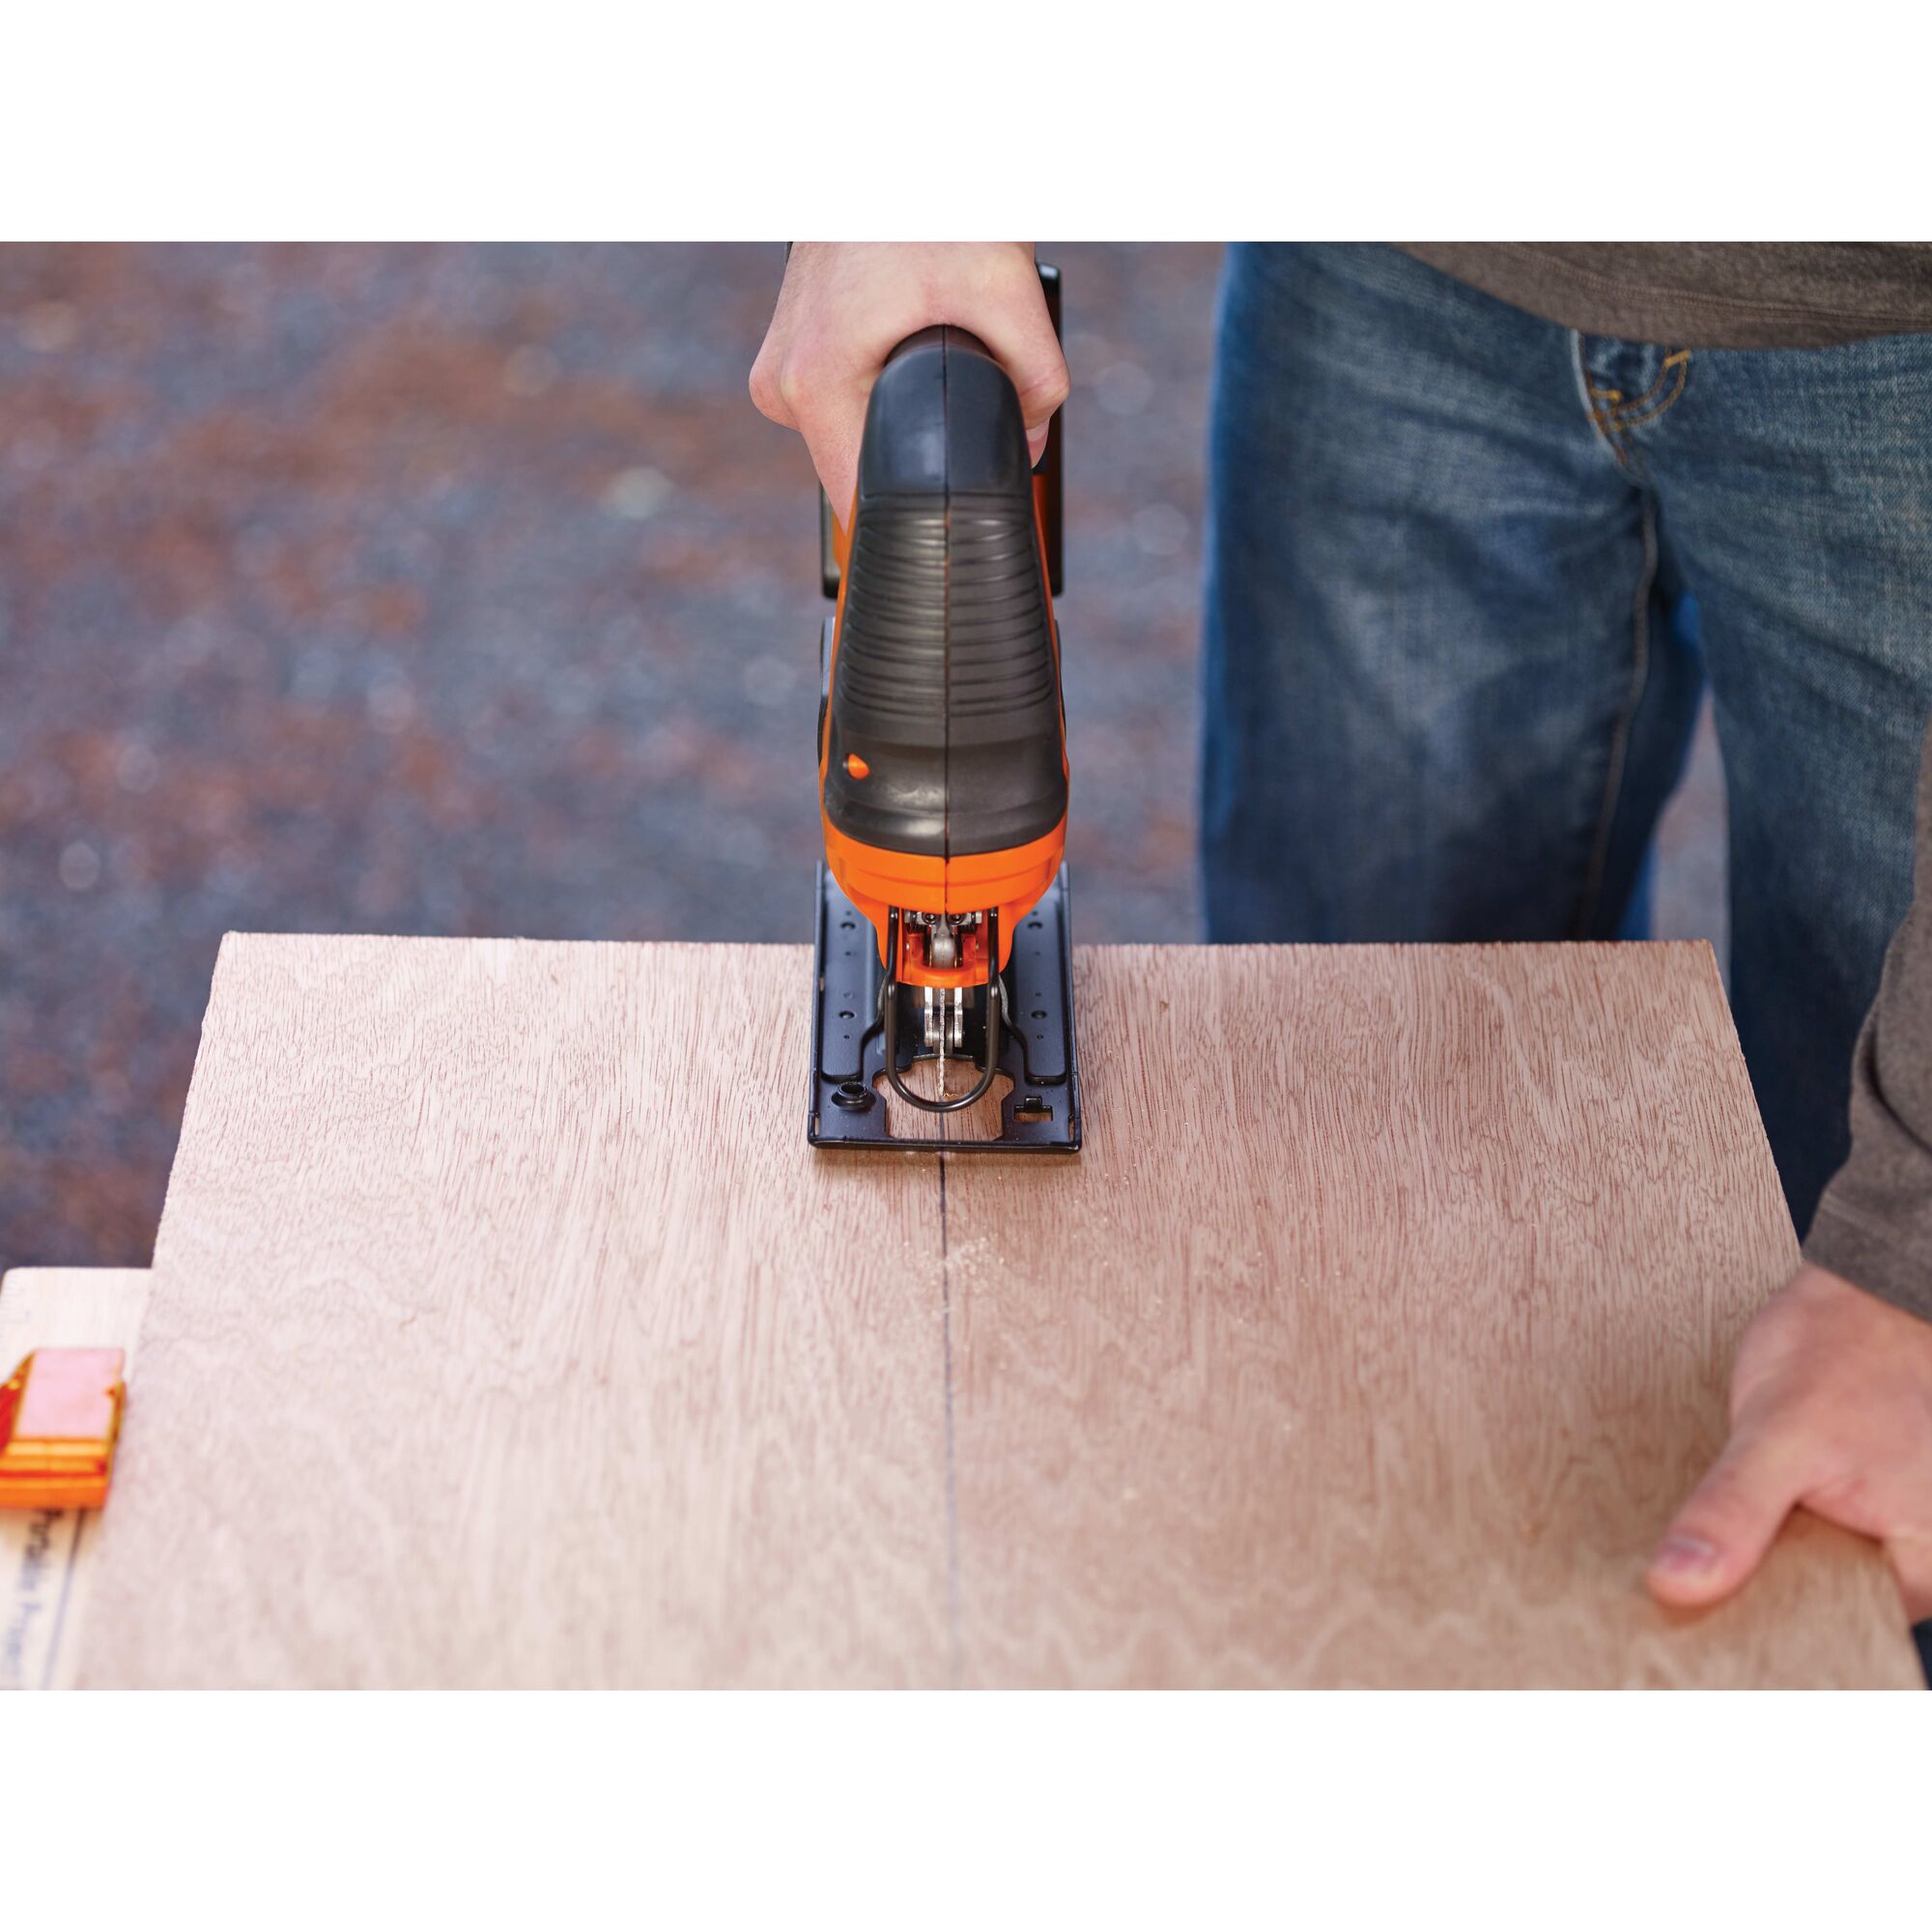 Precise cutting feature of Cordless Jigsaw.